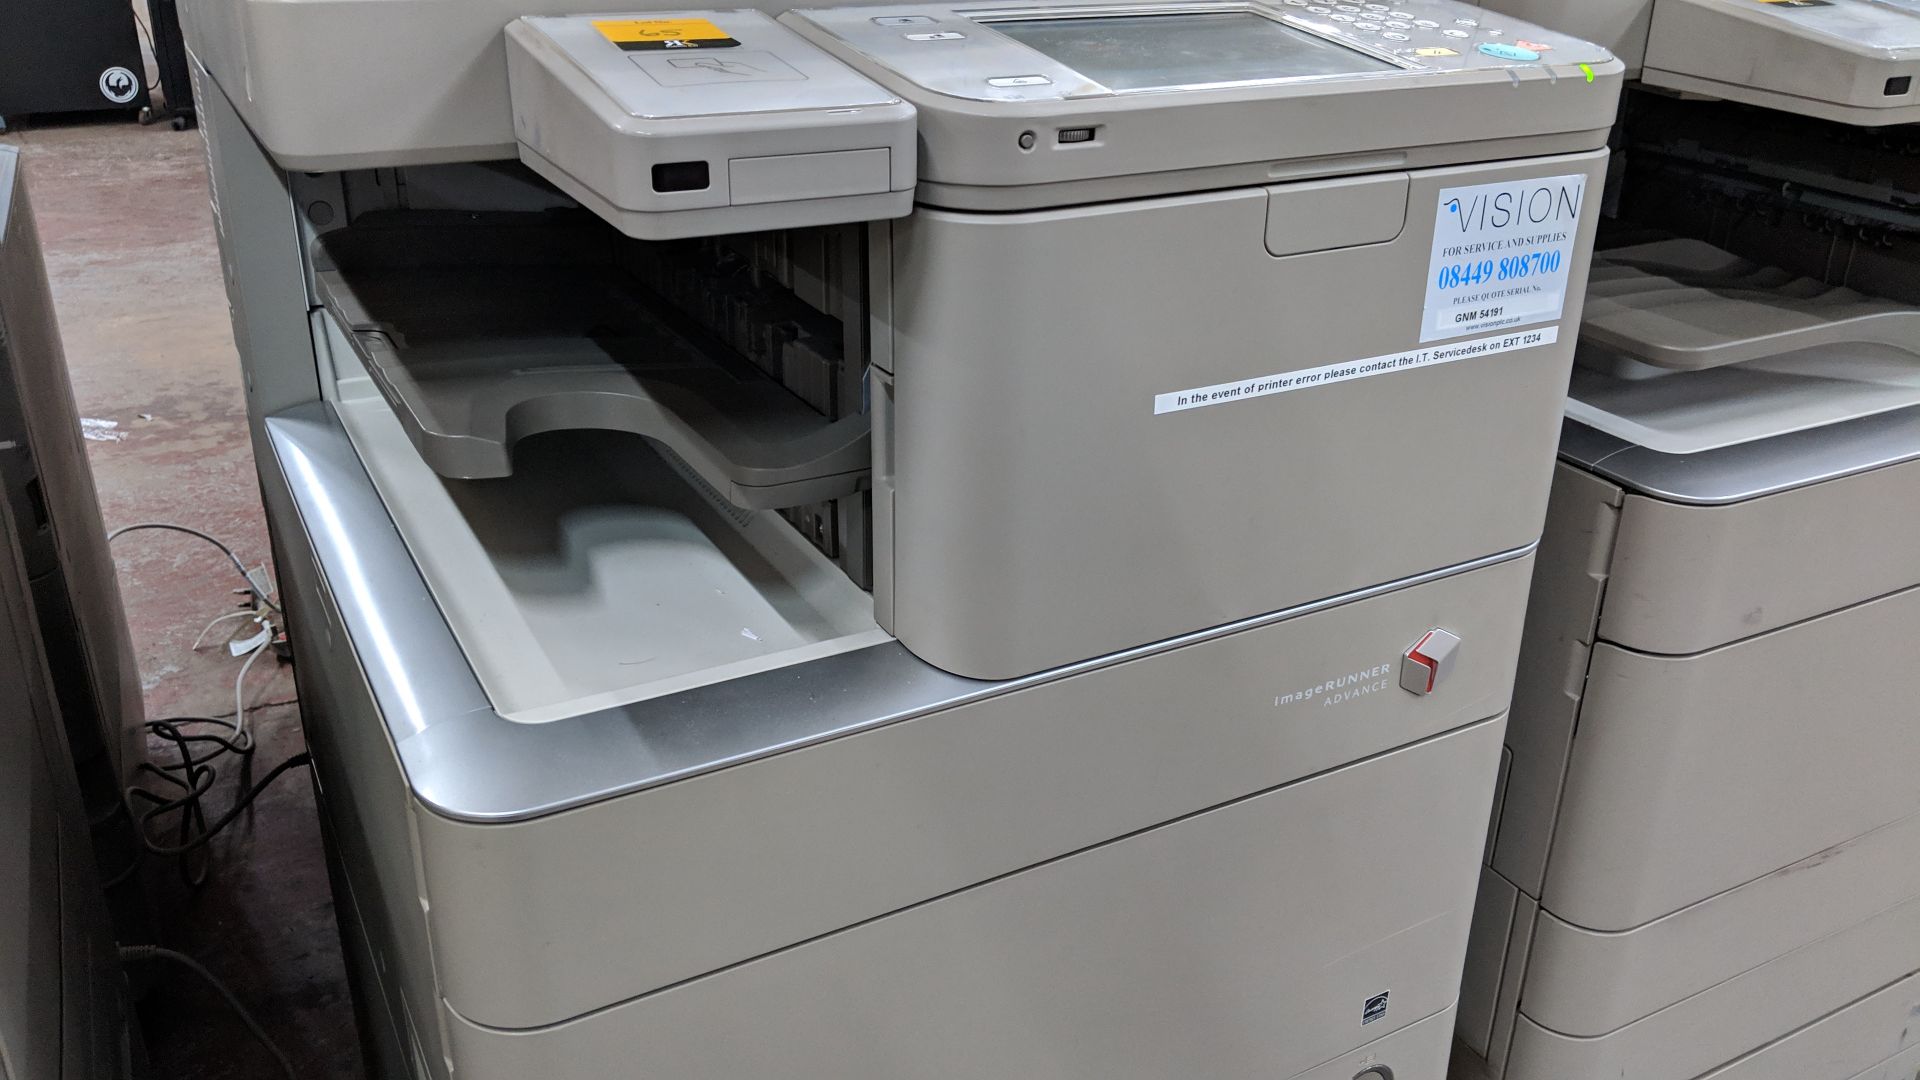 Canon imageRUNNER Advance model C5030i floorstanding copier with auto docufeed & pedestal - Image 7 of 12